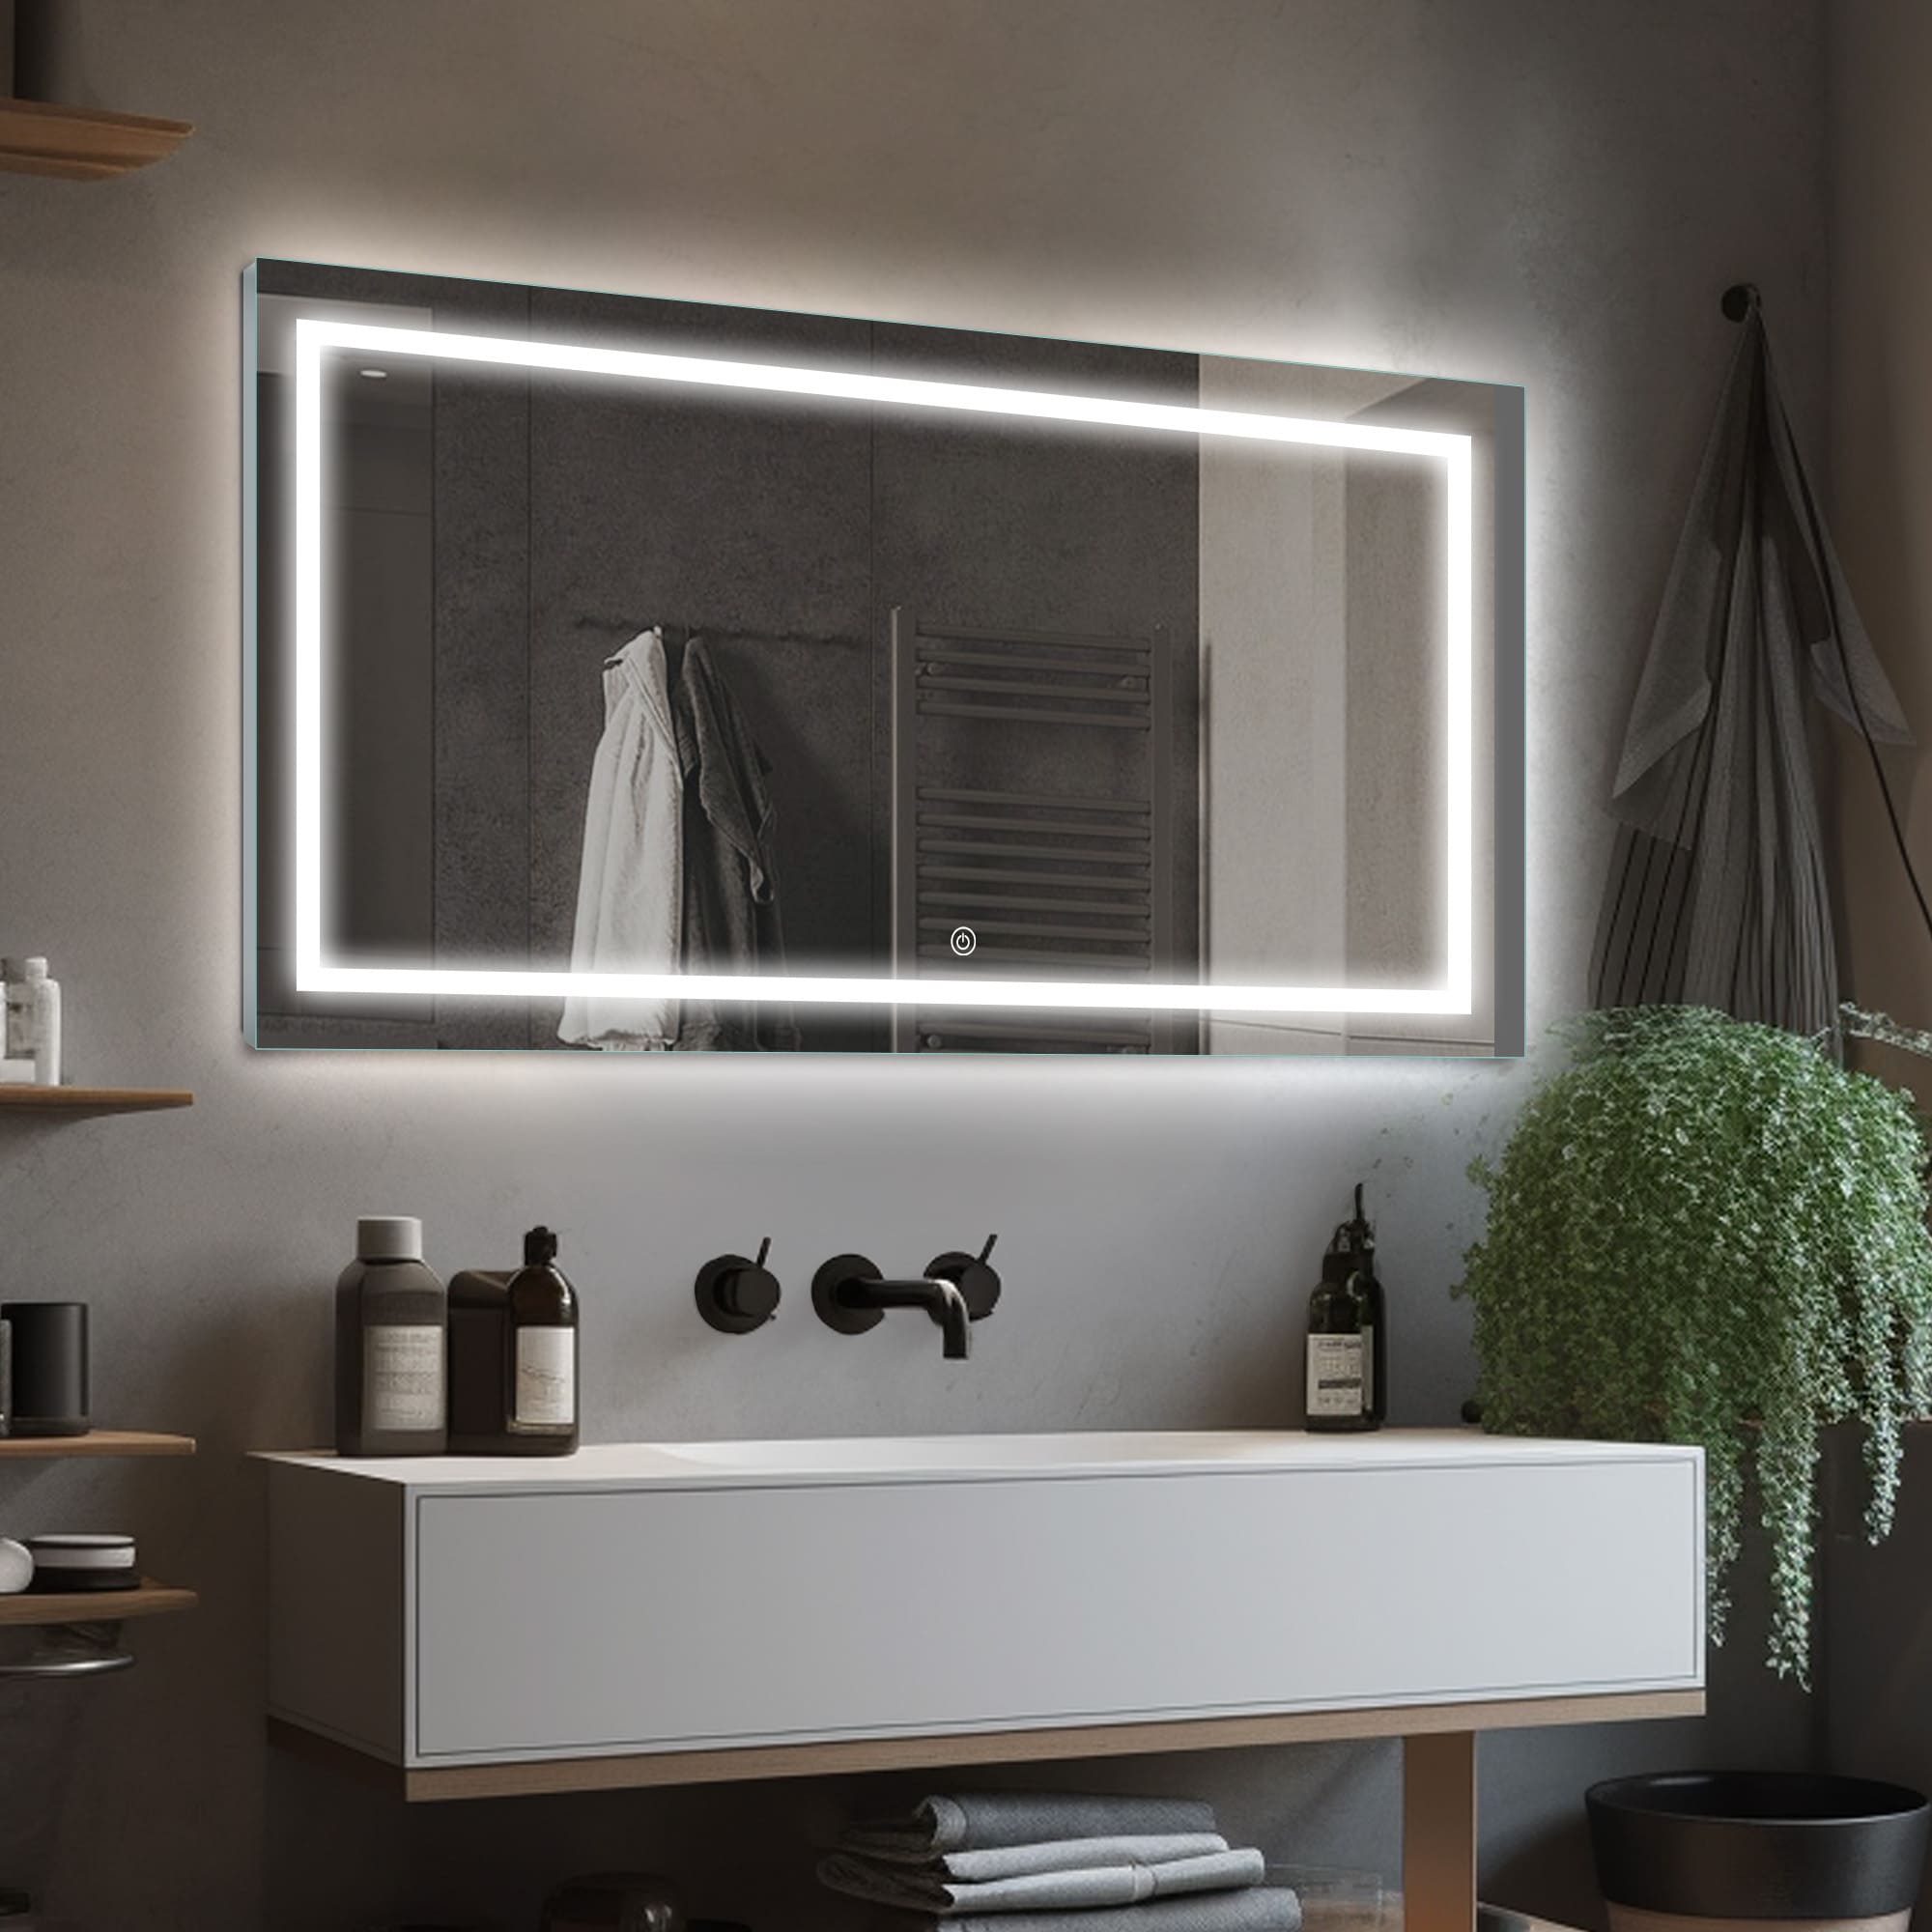 LOOK™ Outer Etched Backlit Mirror